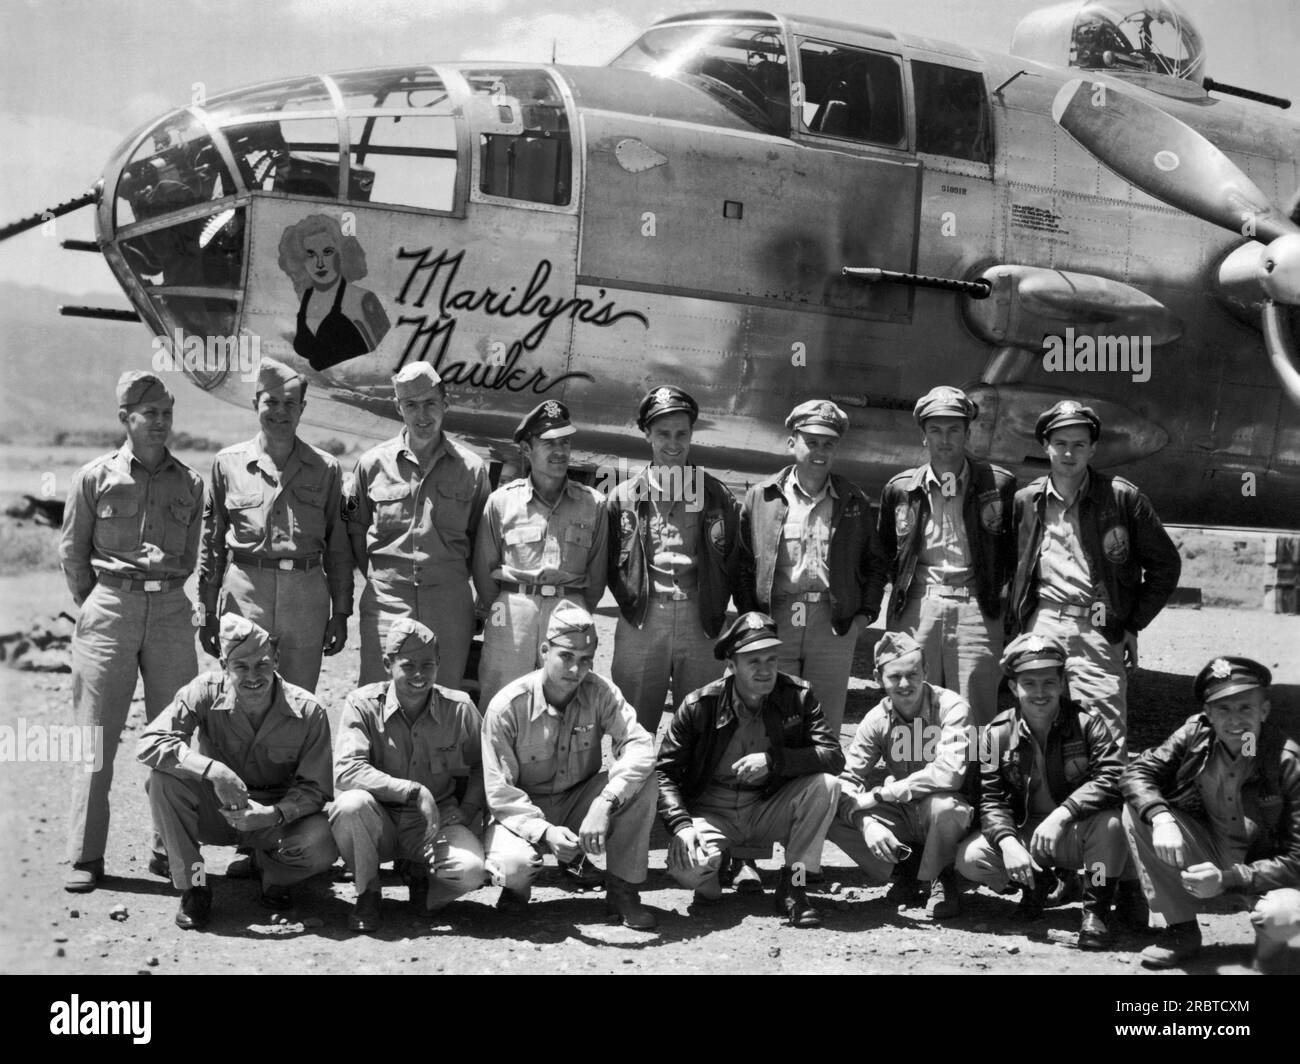 SE Asia:  c. 1943 The crew of a B-25 bomber named the 'Marilyn's Mauler' poses beside it somewhere in the Pacific theater during WWII. Stock Photo